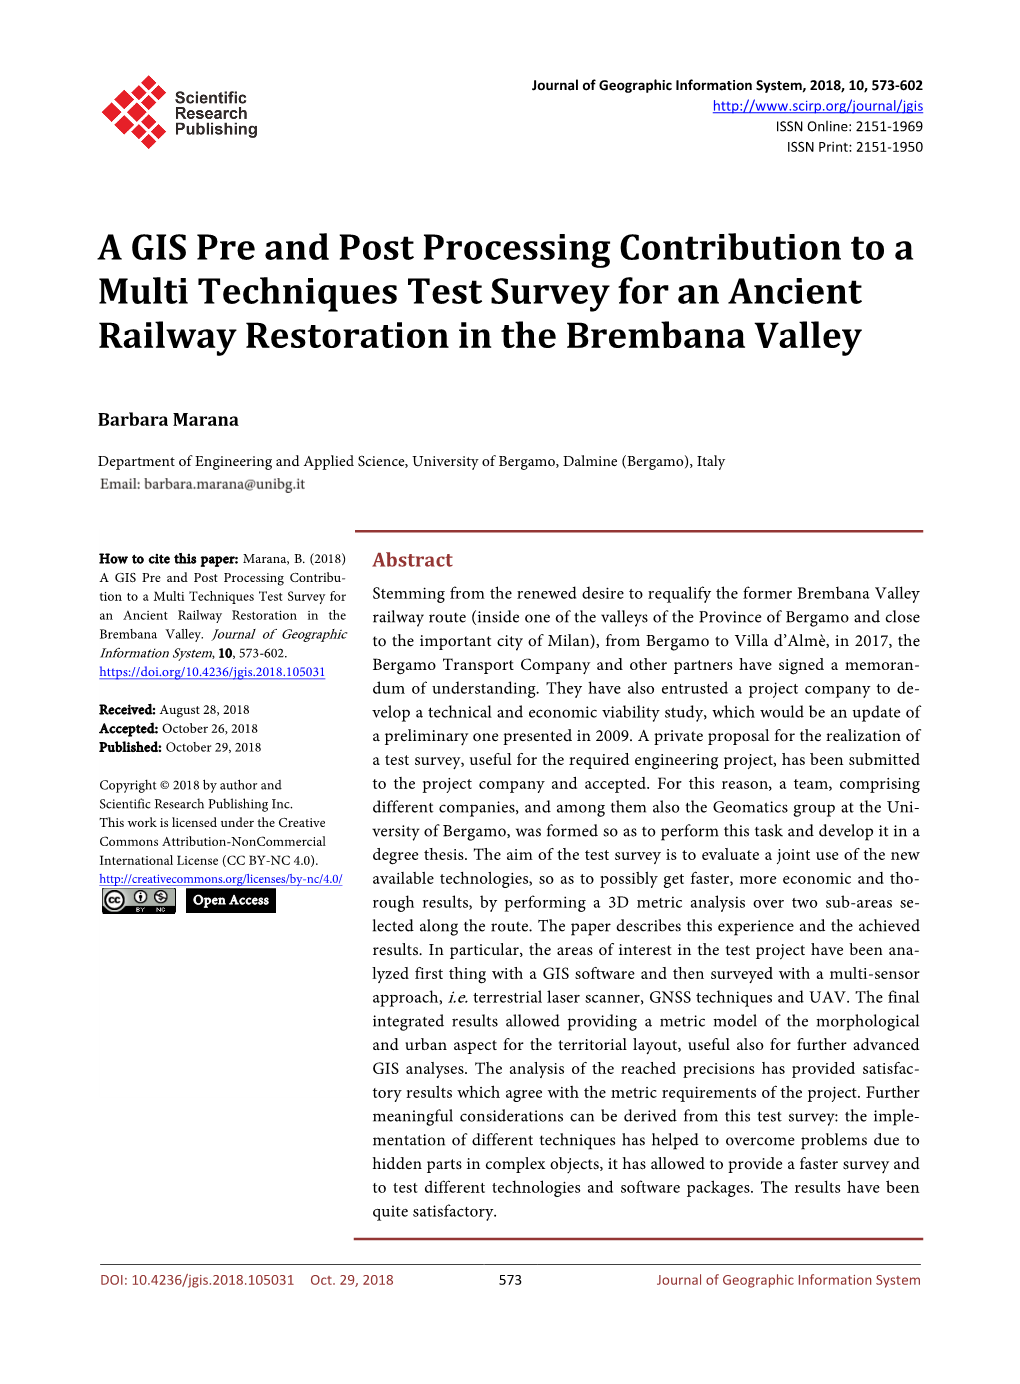 A GIS Pre and Post Processing Contribution to a Multi Techniques Test Survey for an Ancient Railway Restoration in the Brembana Valley